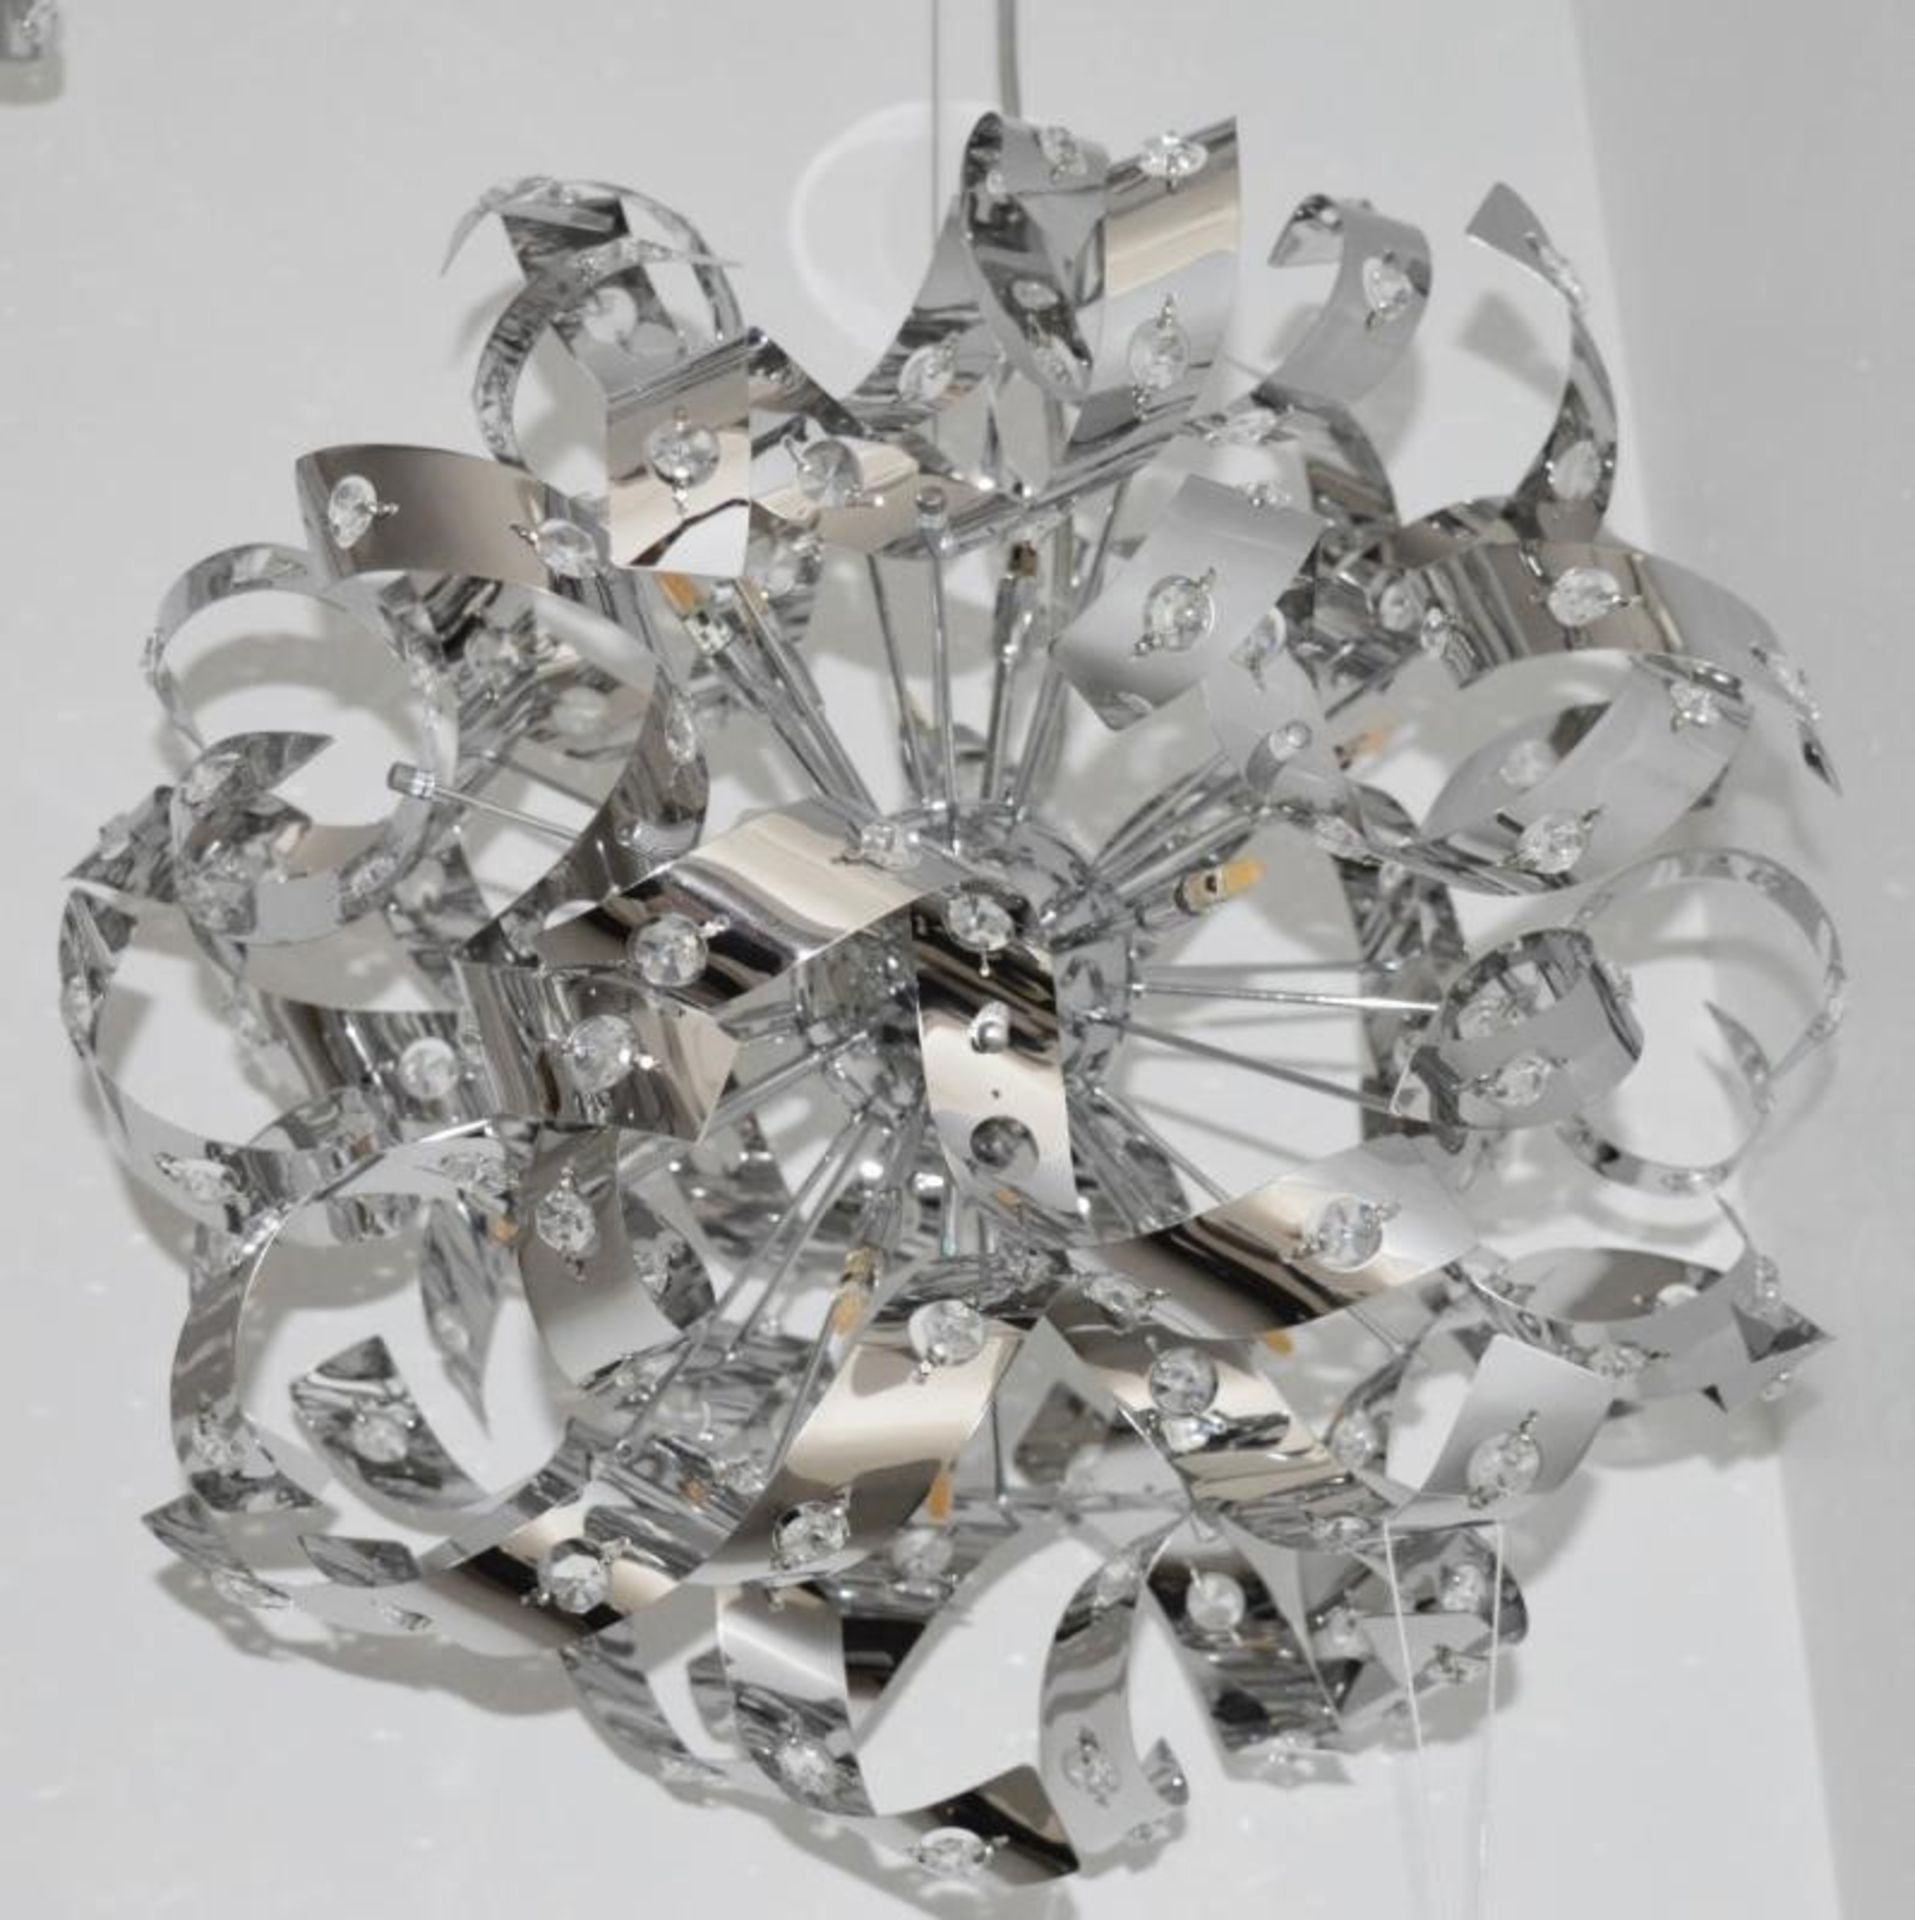 1 x CURLS Chrome 12-Light Pendant Fitting With Crystal Bead Decoration - Ex Display Stock - CL298 - - Image 2 of 3